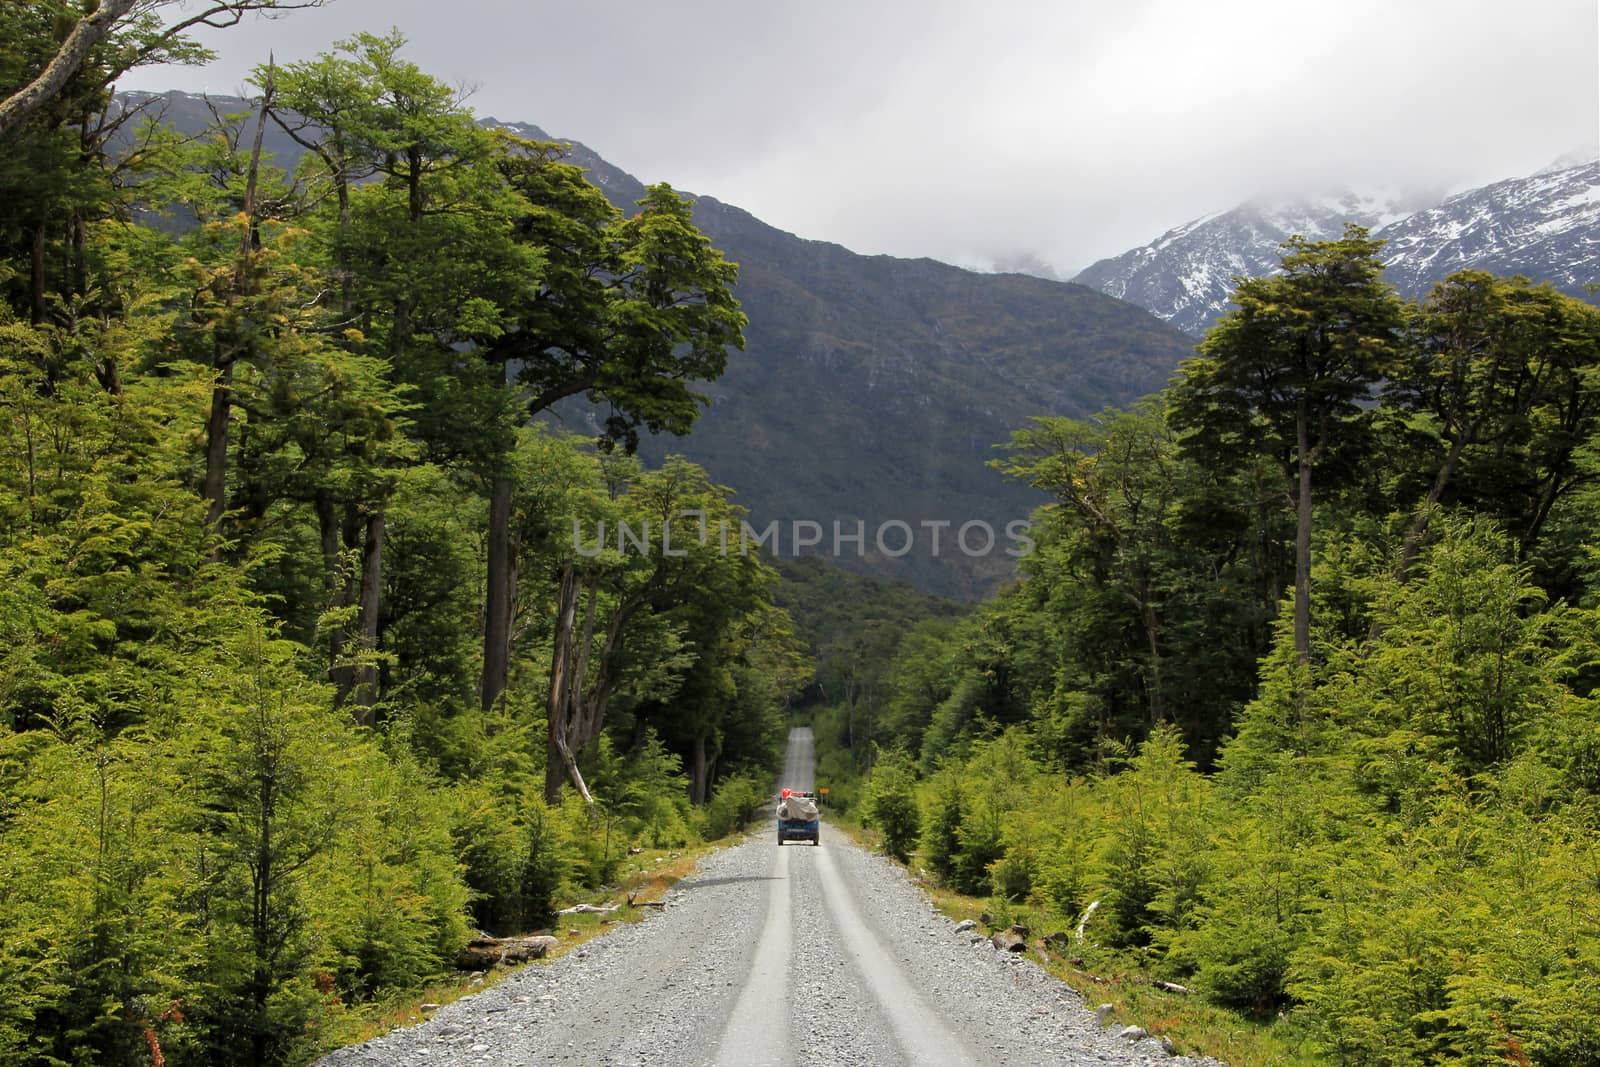 Van driving on Carretera Austral, on the way to Villa O'Higgins, Patagonia, Chile